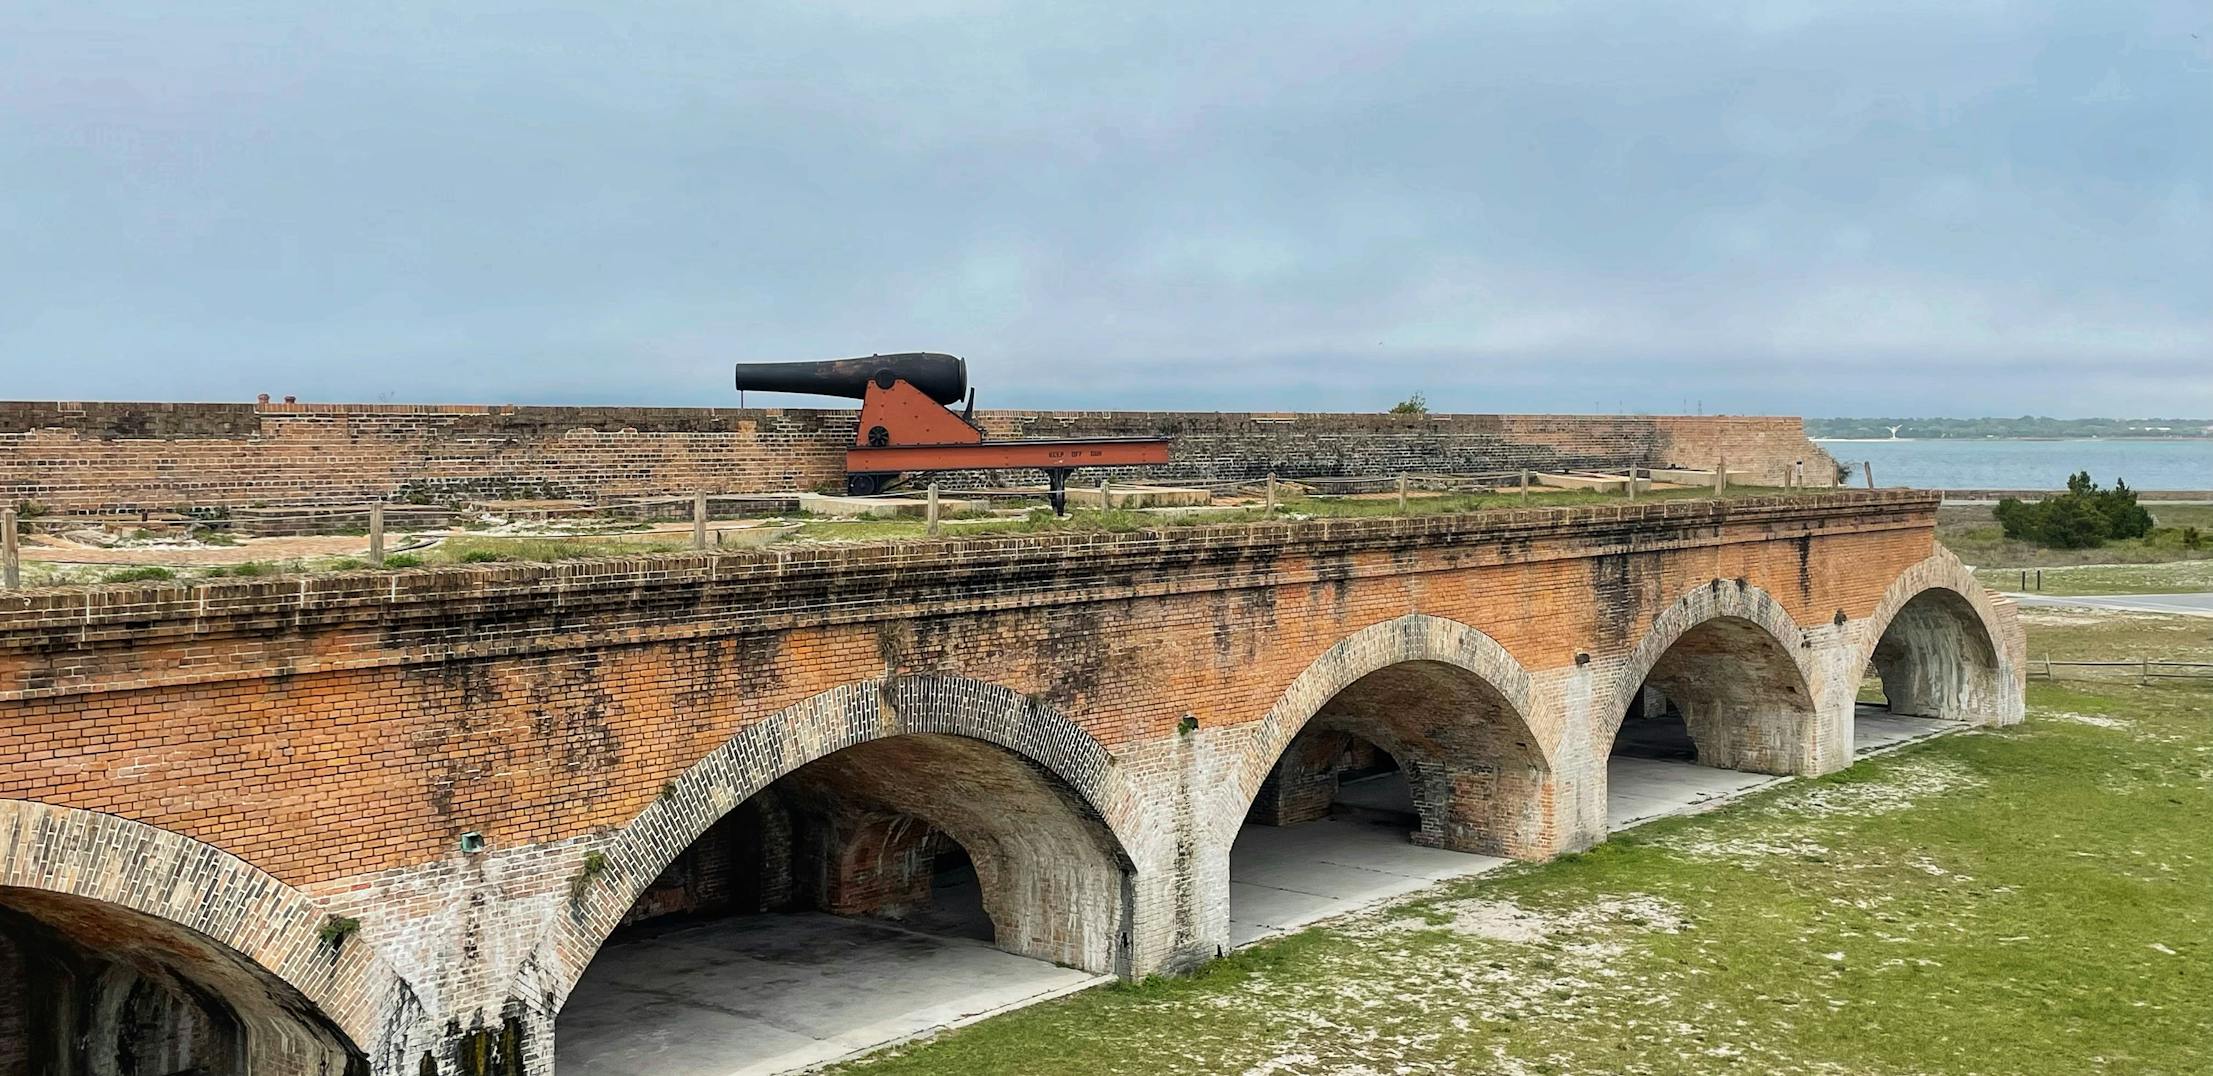 The fort at Fort Pickens in Pensacola, Florida, captured by Ben McMillan. 